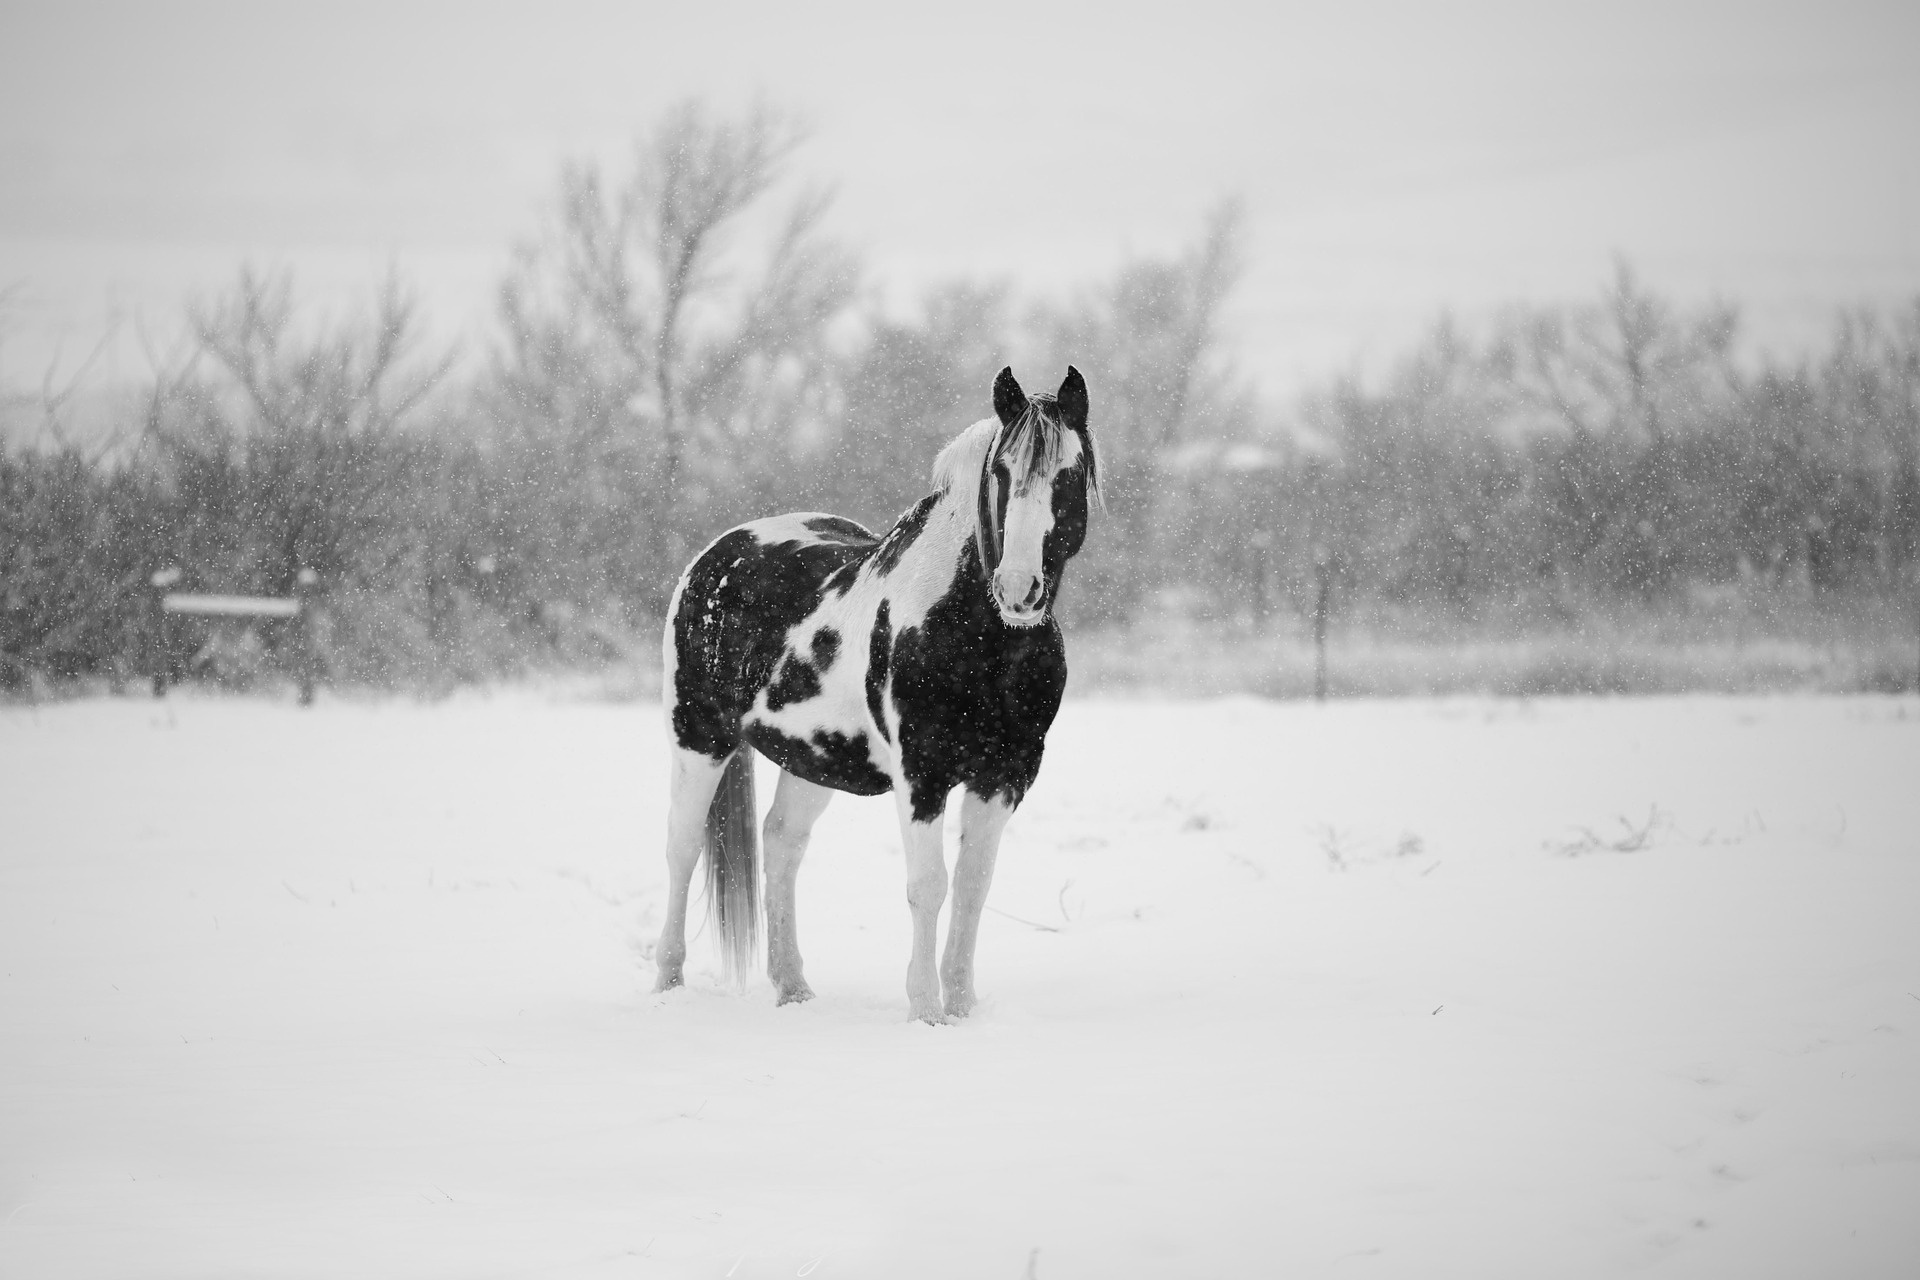 Caring for horses in winter, Equine well-being, Winter horse management, Equestrian expertise, 1920x1280 HD Desktop